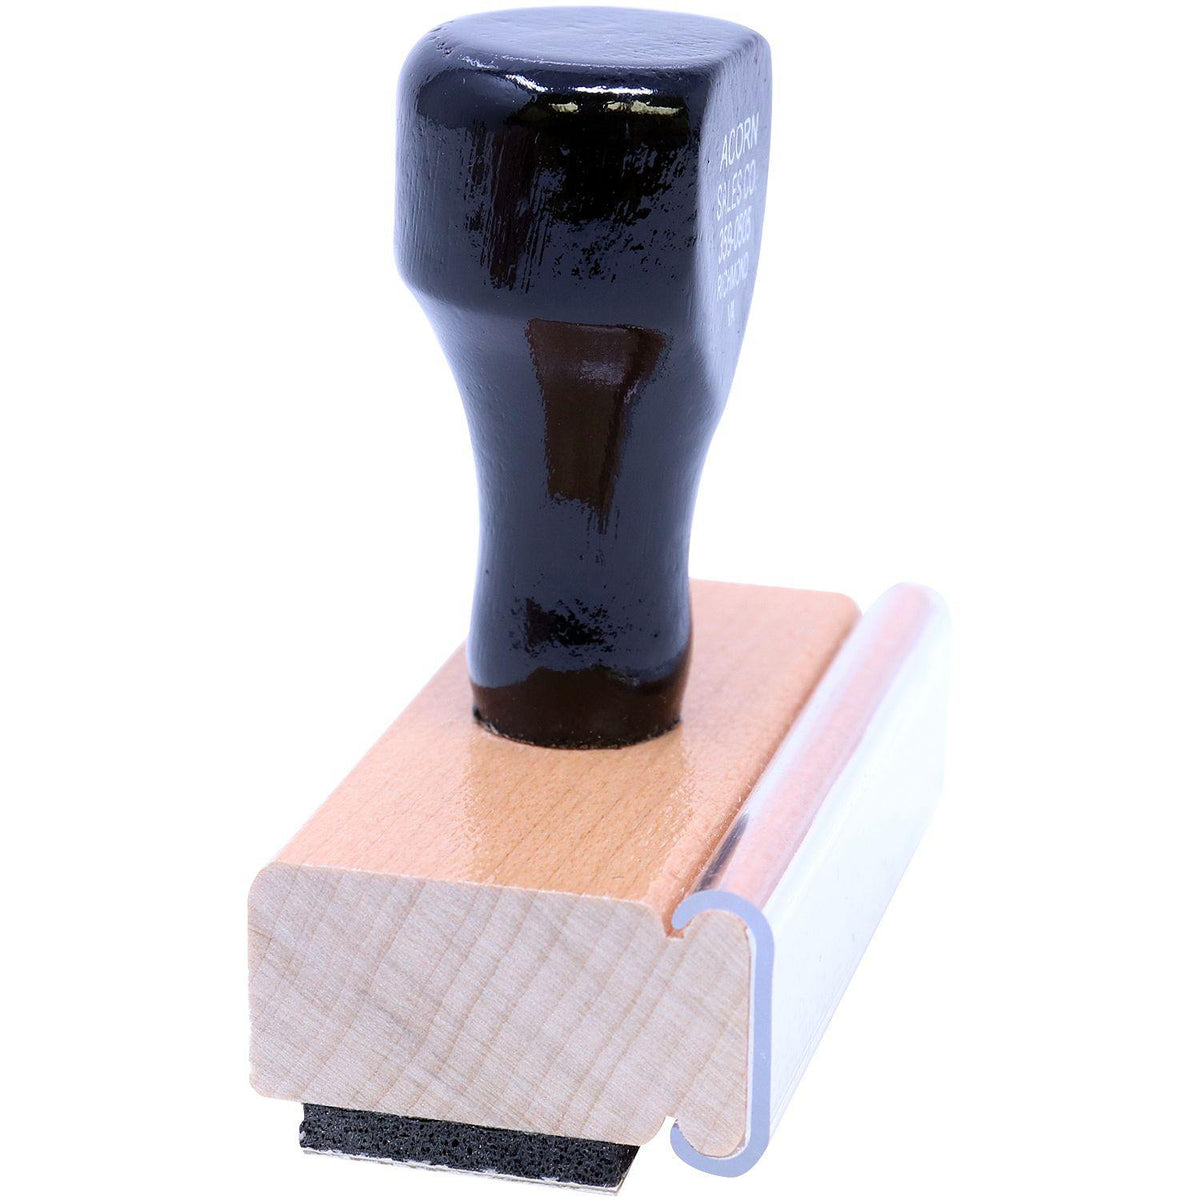 Side View of Title Work Rubber Stamp at an Angle